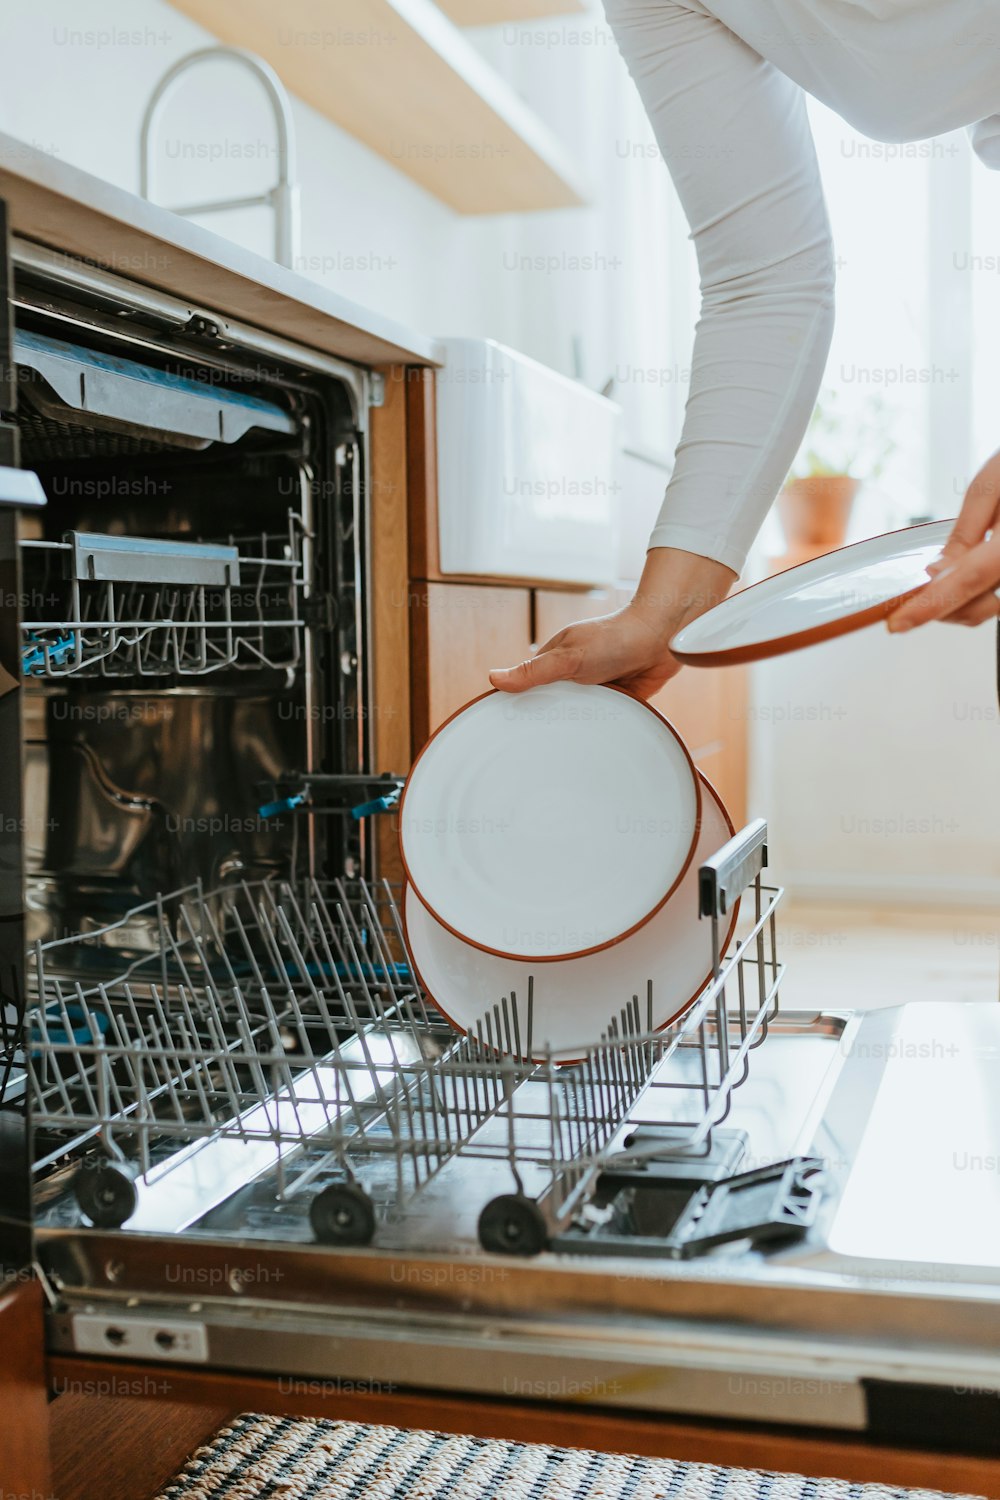 a woman is holding a dishwasher in her hand